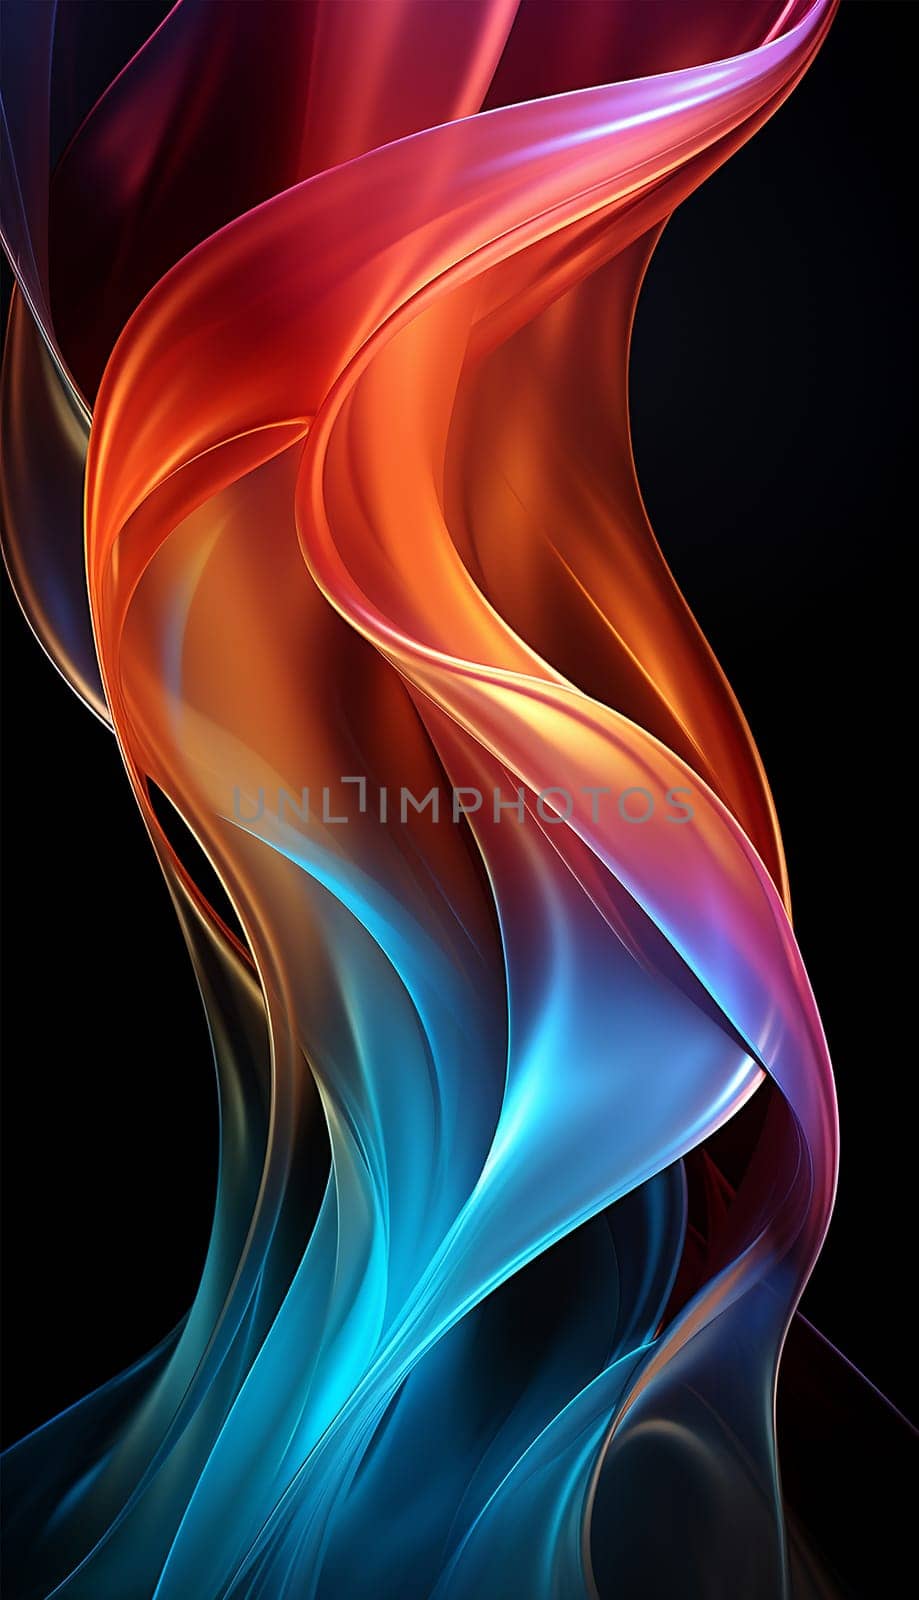 Abstract 3d render. Multicolored waves. Holographic shape in motion. Iridescent gradient digital art for banner background, wallpaper. Transparent glossy design element flying in seascape. Black background Various neon colors by Annebel146